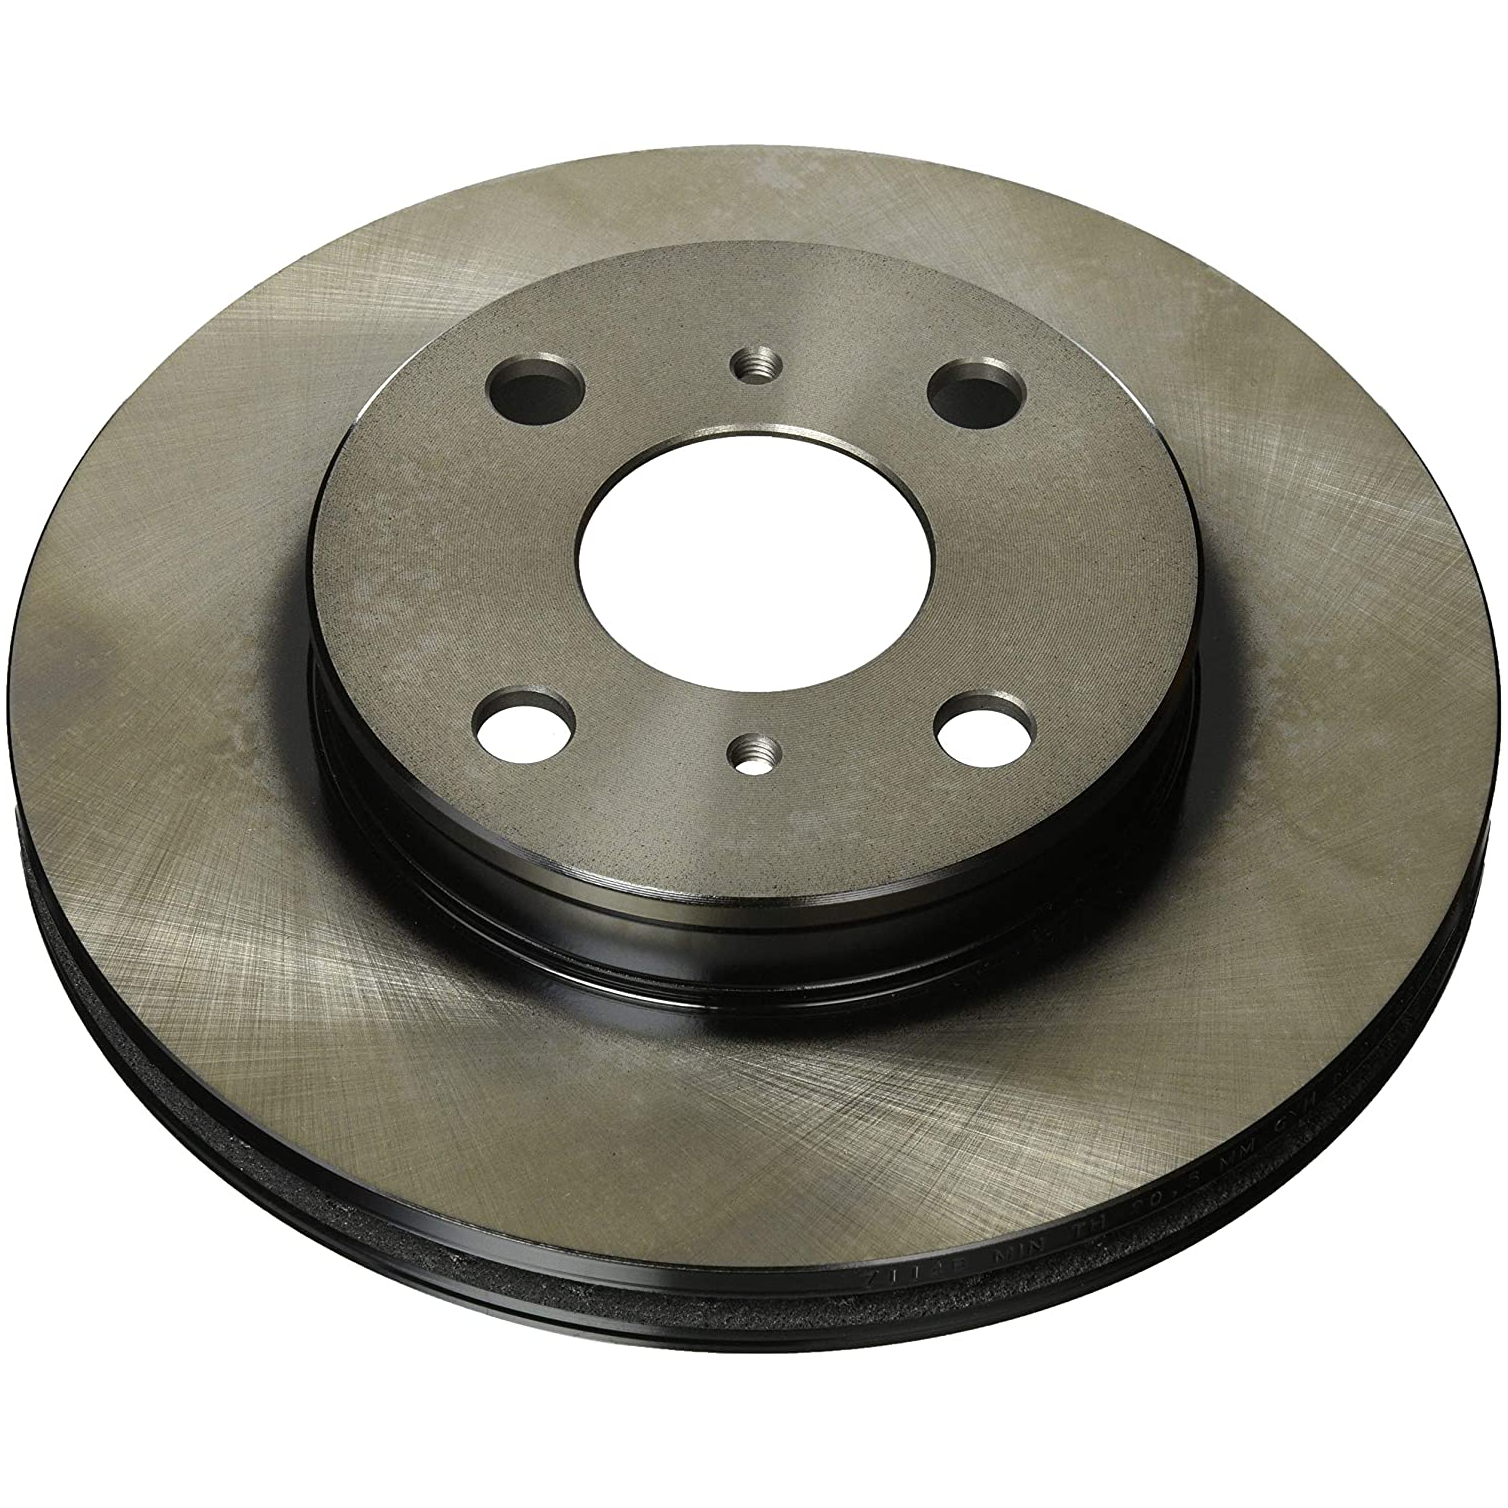 43512-12350 High Quality Terbon Auto Brake System Parts 238 mm Car Brake Disc Front Axle Vented Disk Brake Rotors